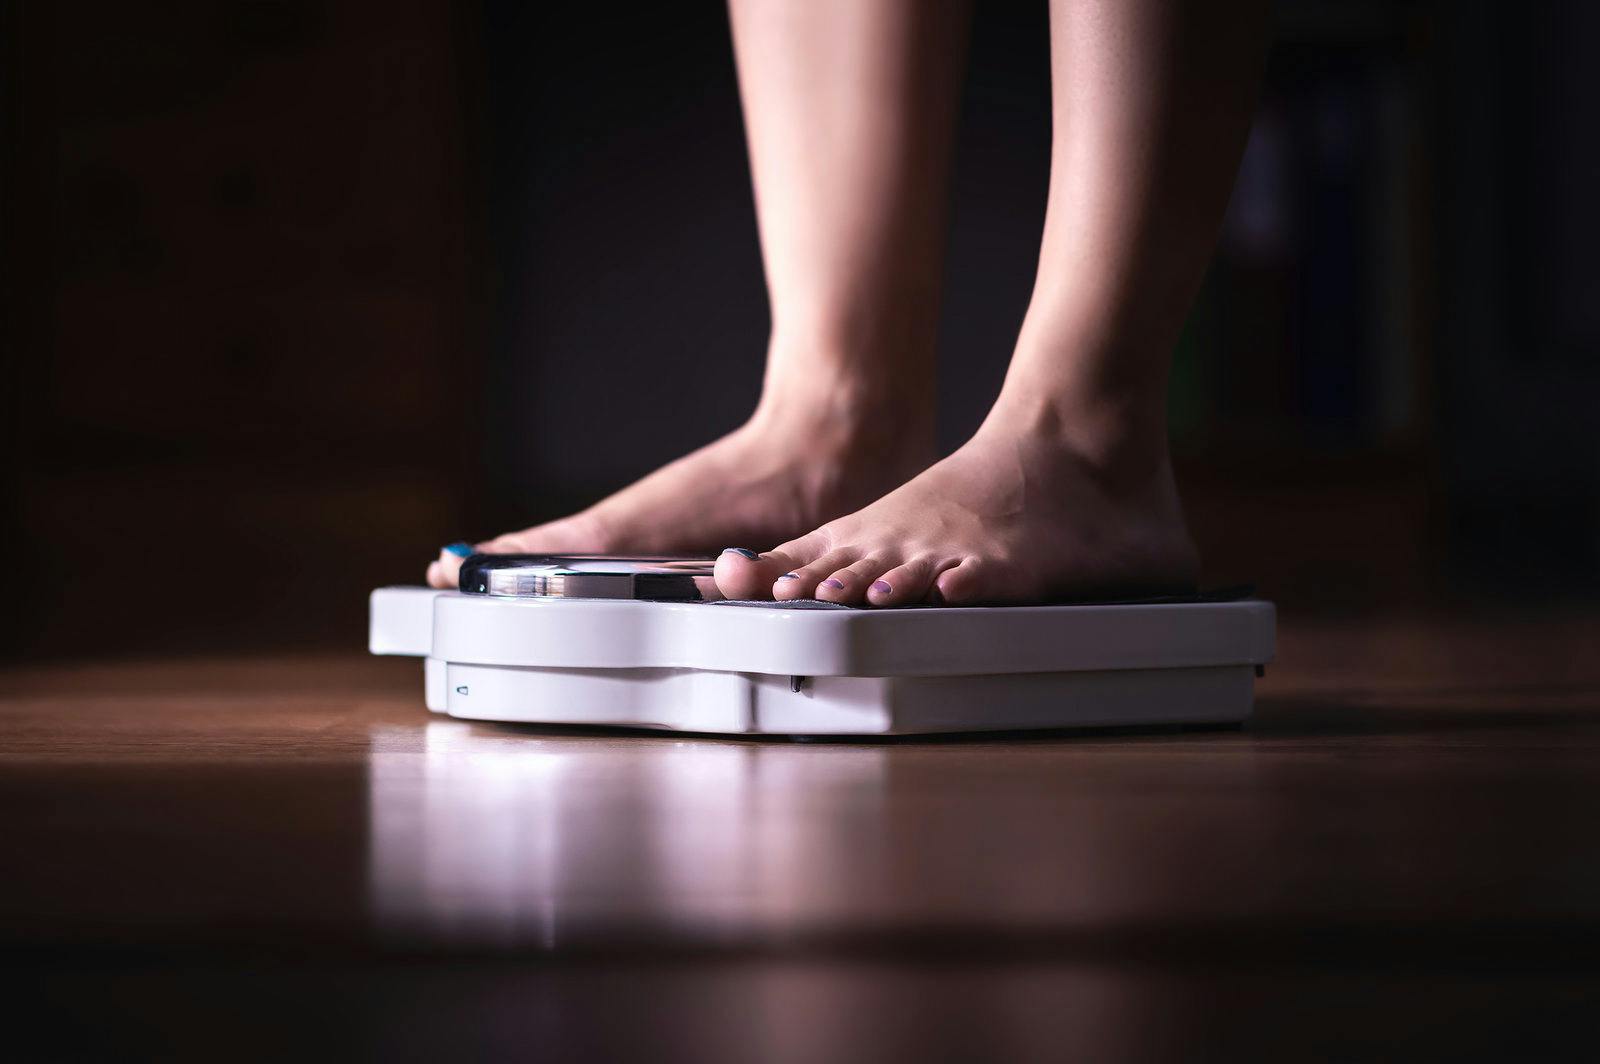 Woman weighing herself on a scale to see if new weight loss medicine is helping